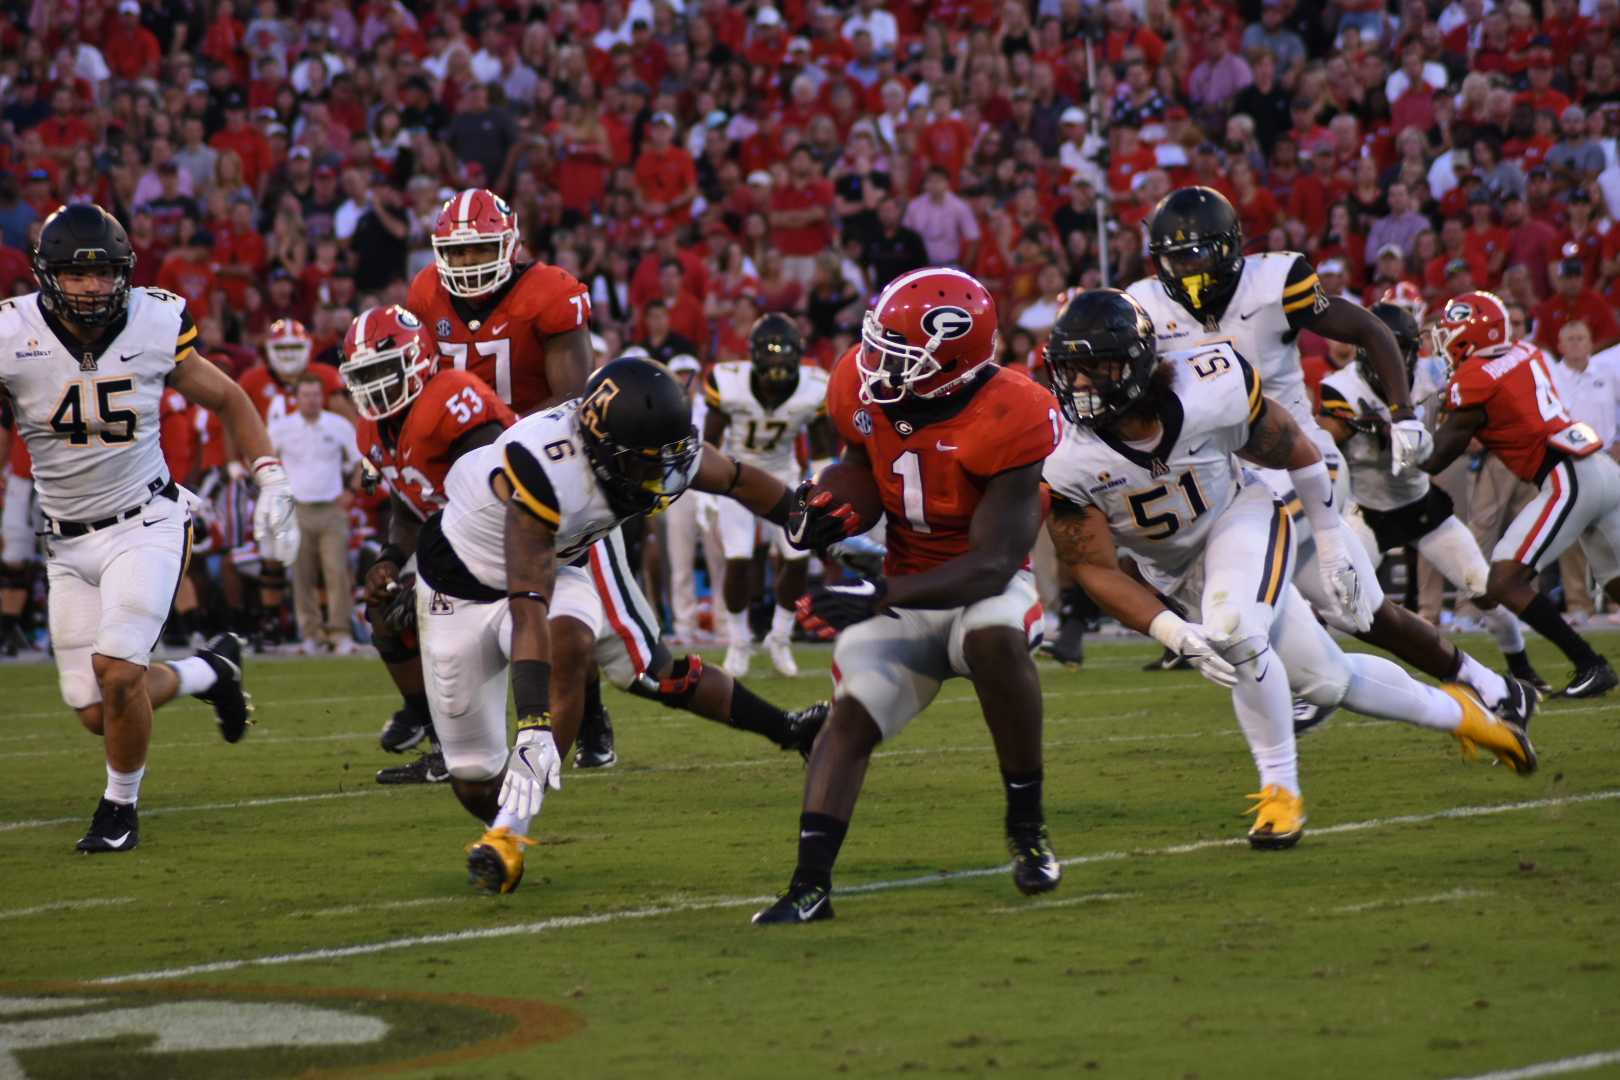 App State fell to Georgia 31-10 in their first game of the season 